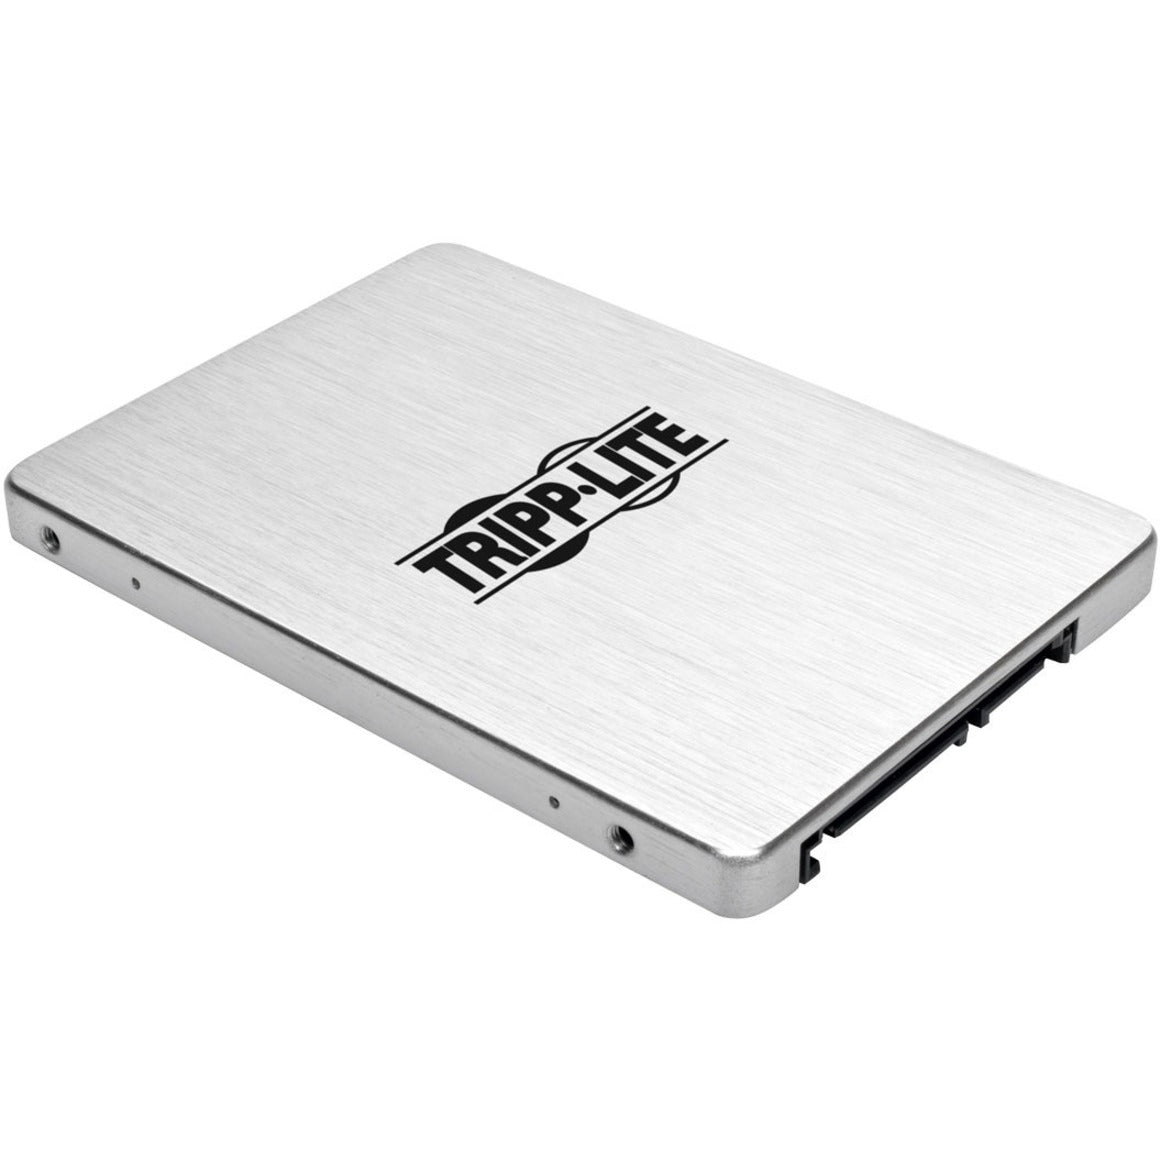 Tripp Lite P960-001-M2 M.2 NGFF SSD to 2.5 in. SATA Enclosure Adapter, Easy SSD Upgrade Solution